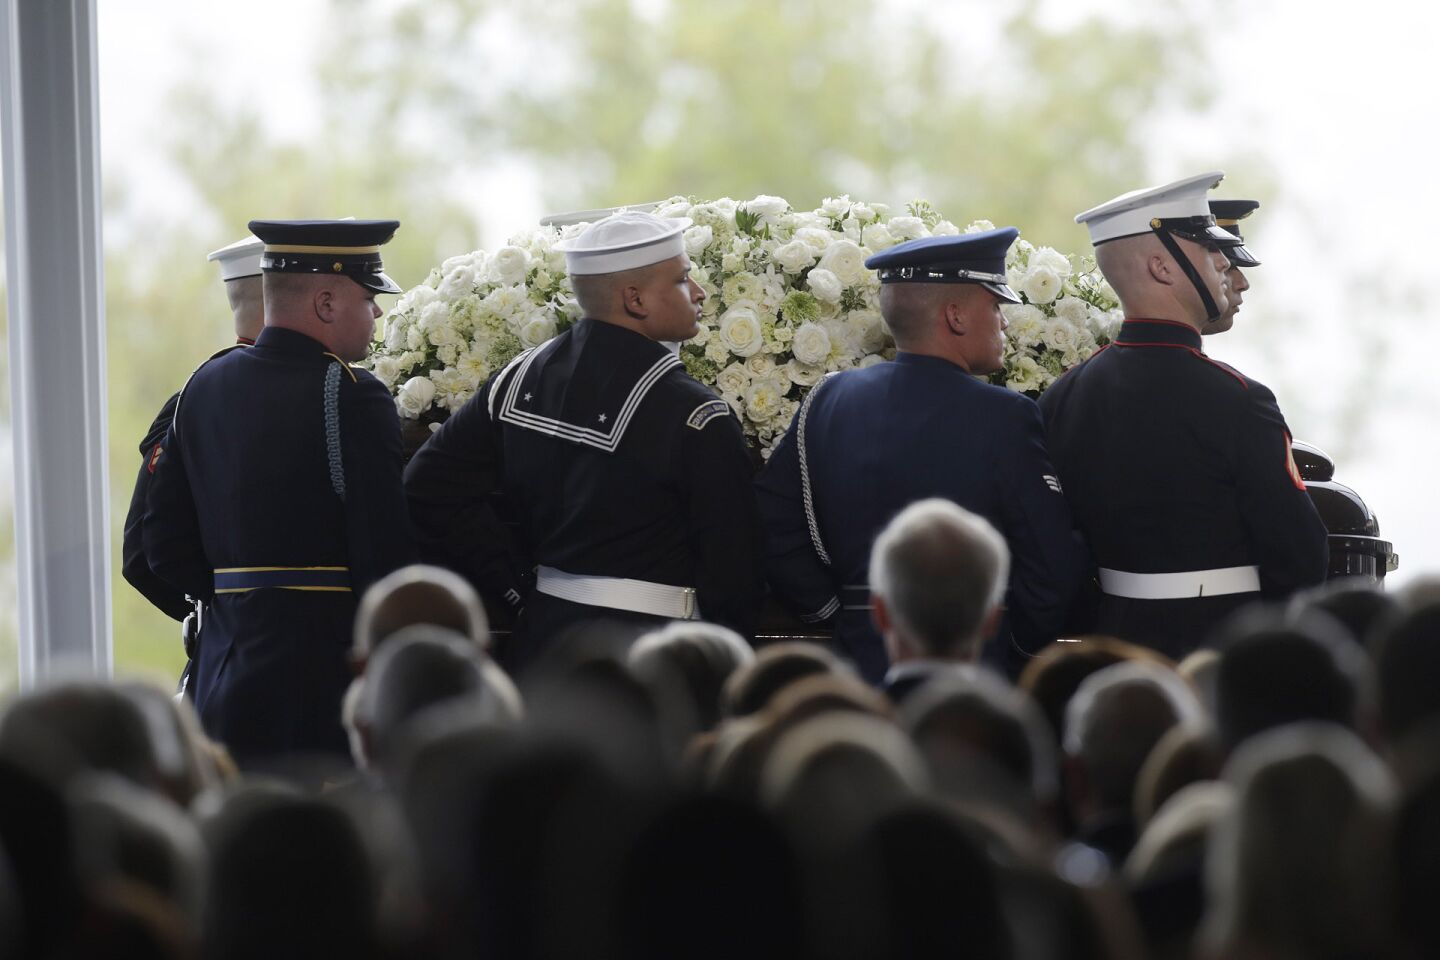 Pallbearers carry the casket of former First Lady Nancy Reagan into her funeral service at the Ronald Reagan Presidential Library in Simi Valley.